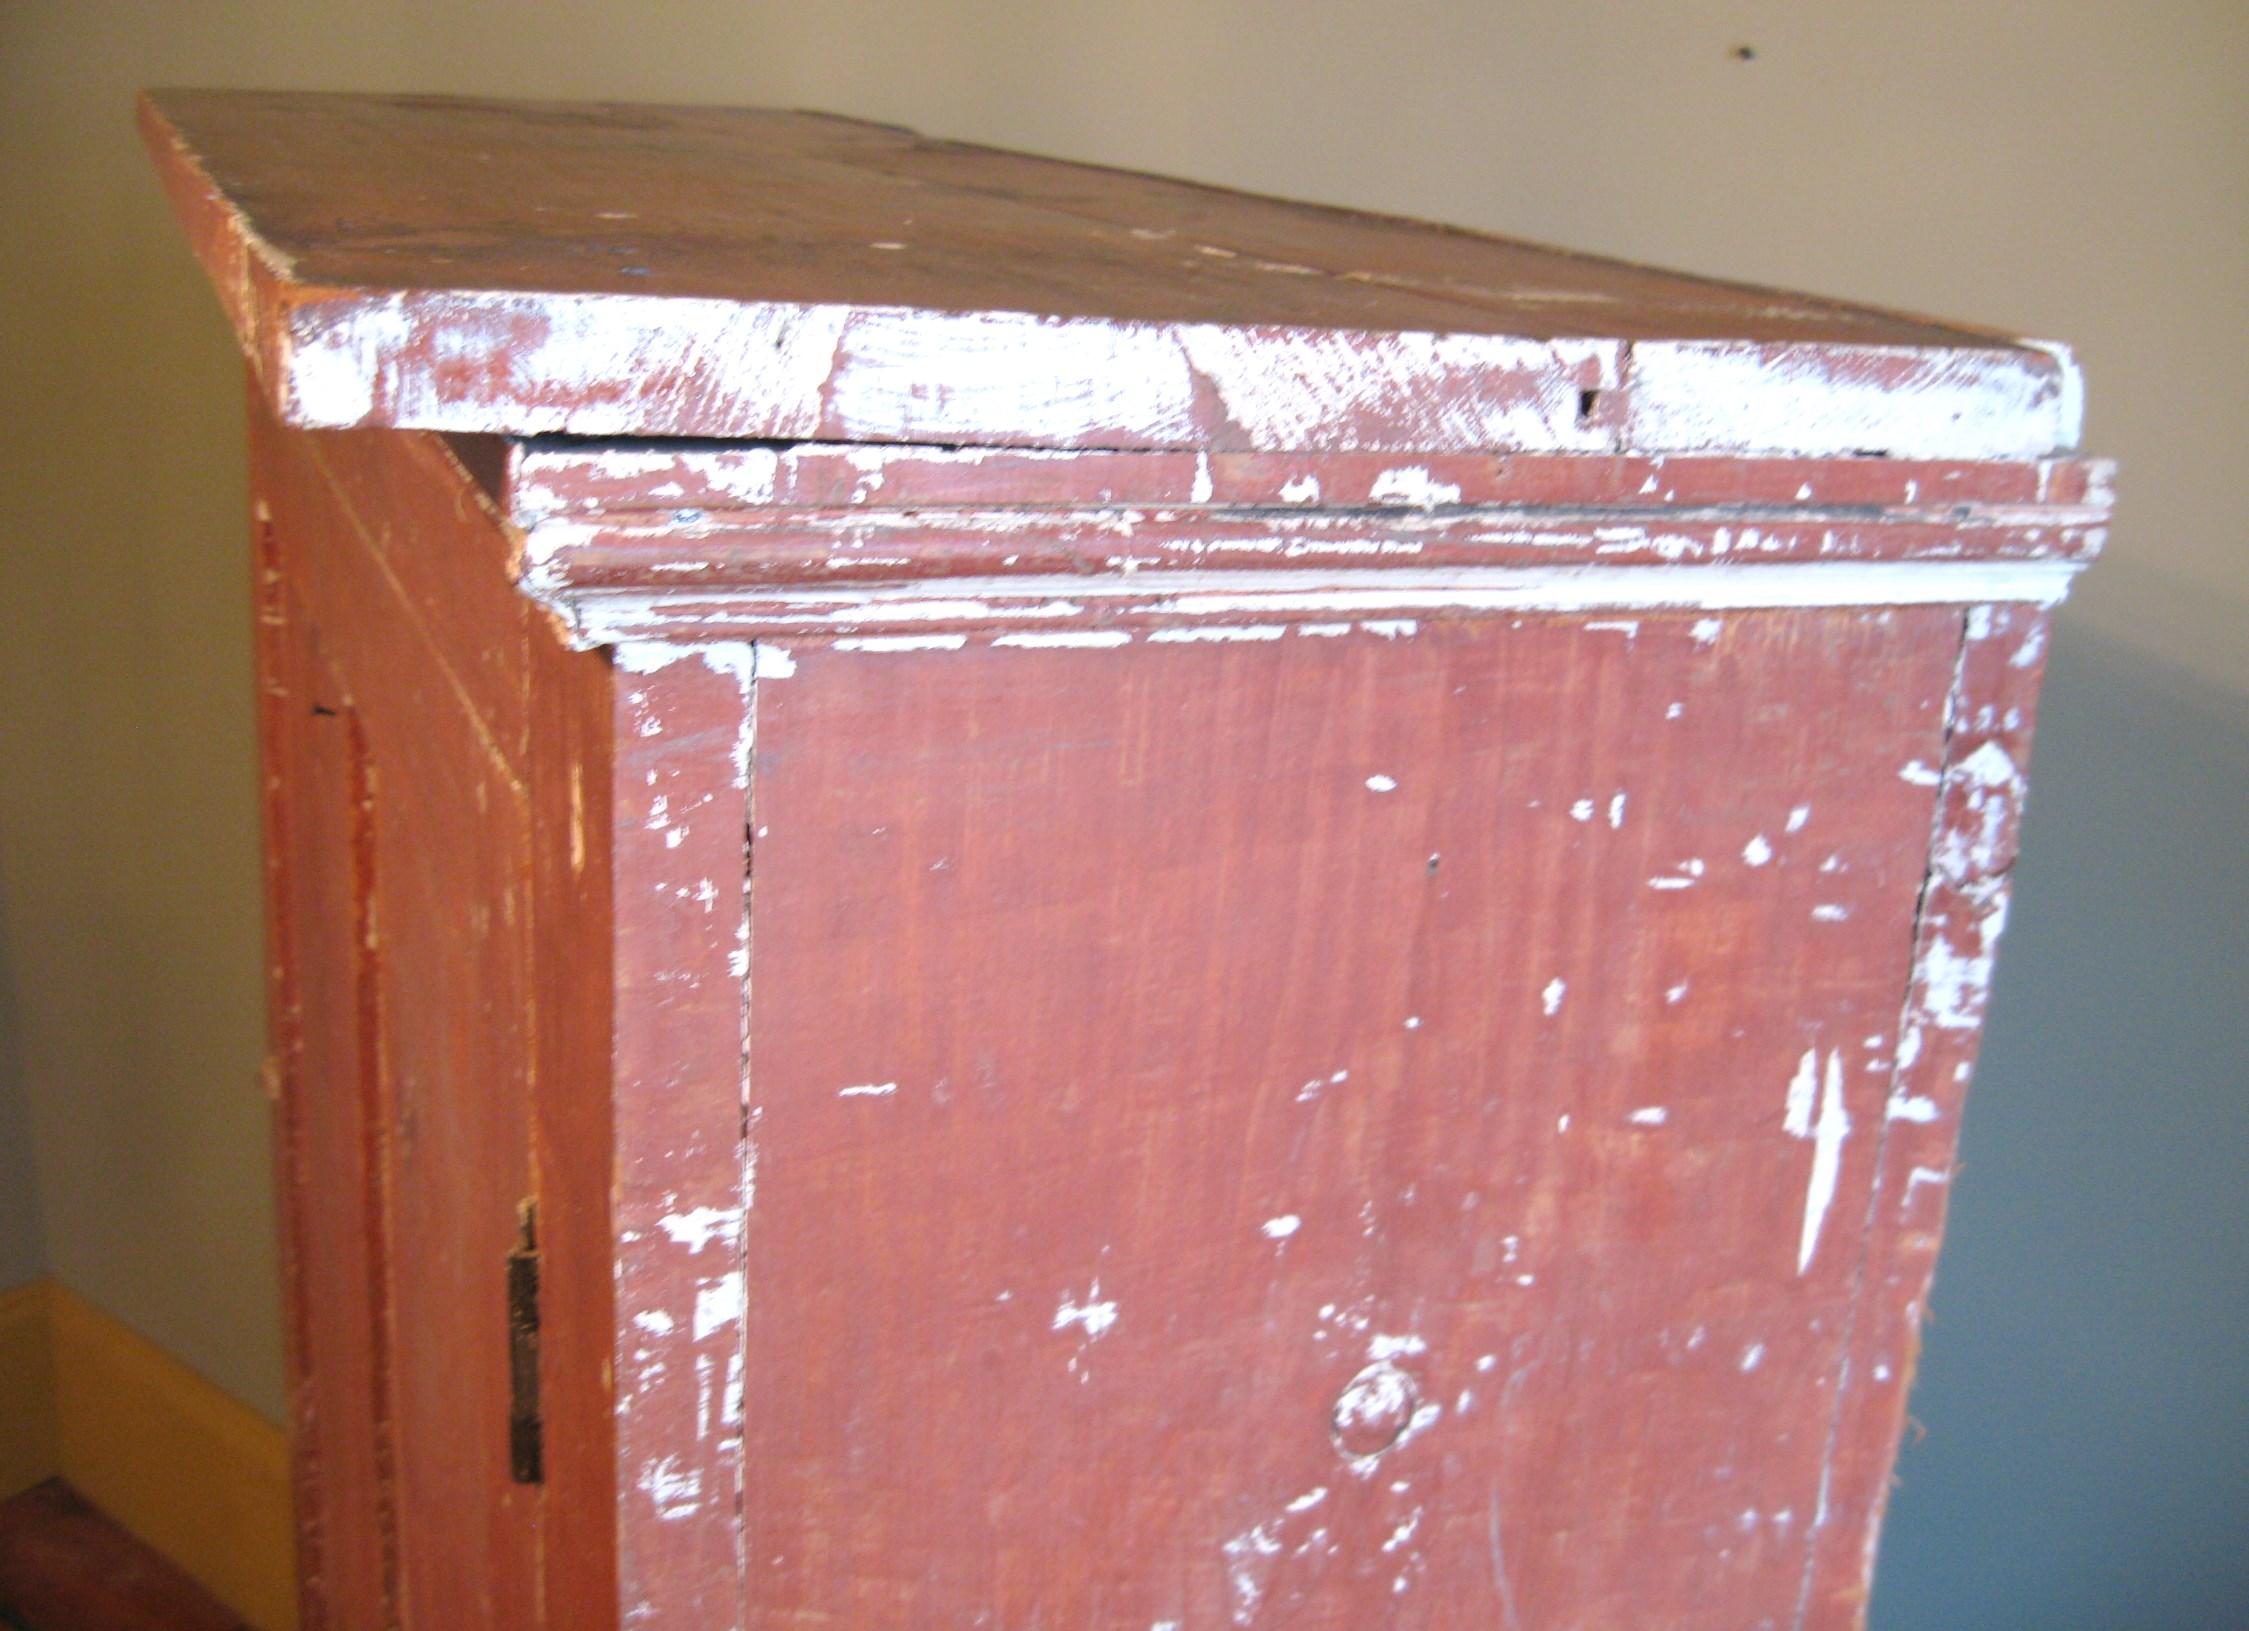 Red Jelly Cupboard One-Door Primitive Pine Cabinet Farmhouse Chic In Good Condition For Sale In Wallkill, NY